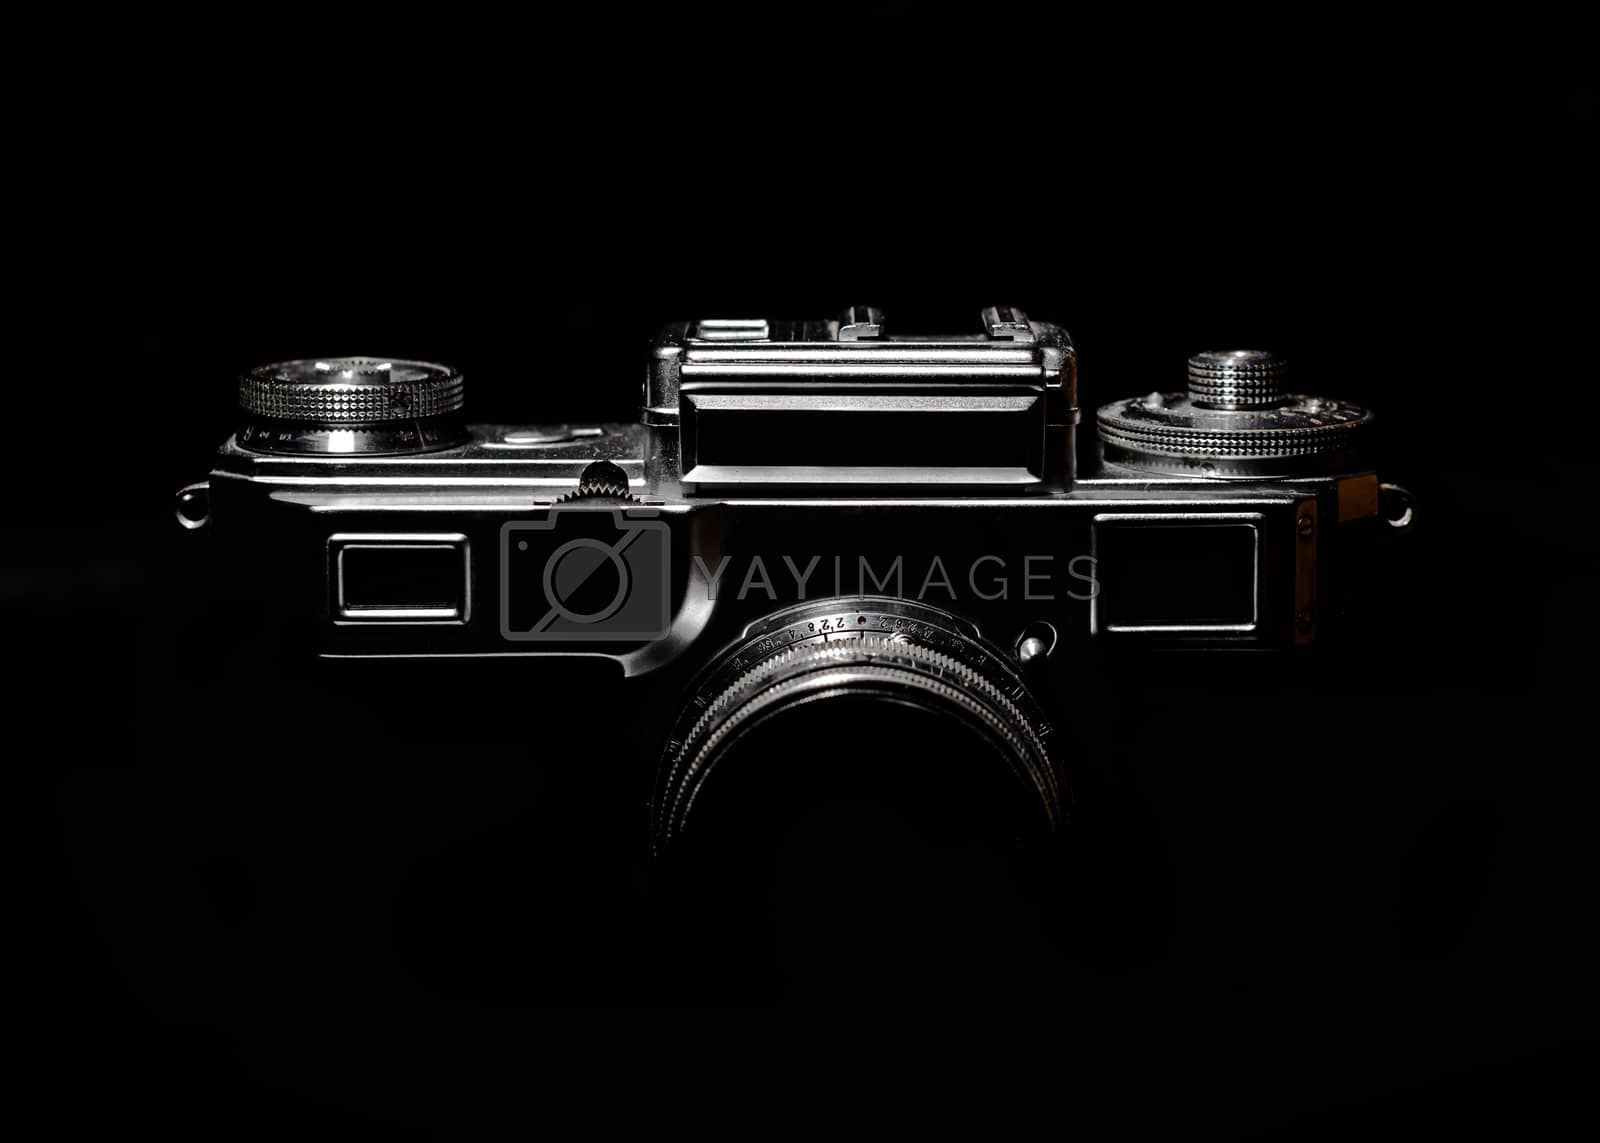 Royalty free image of contour of a vintage camera in the dark by Gera8th